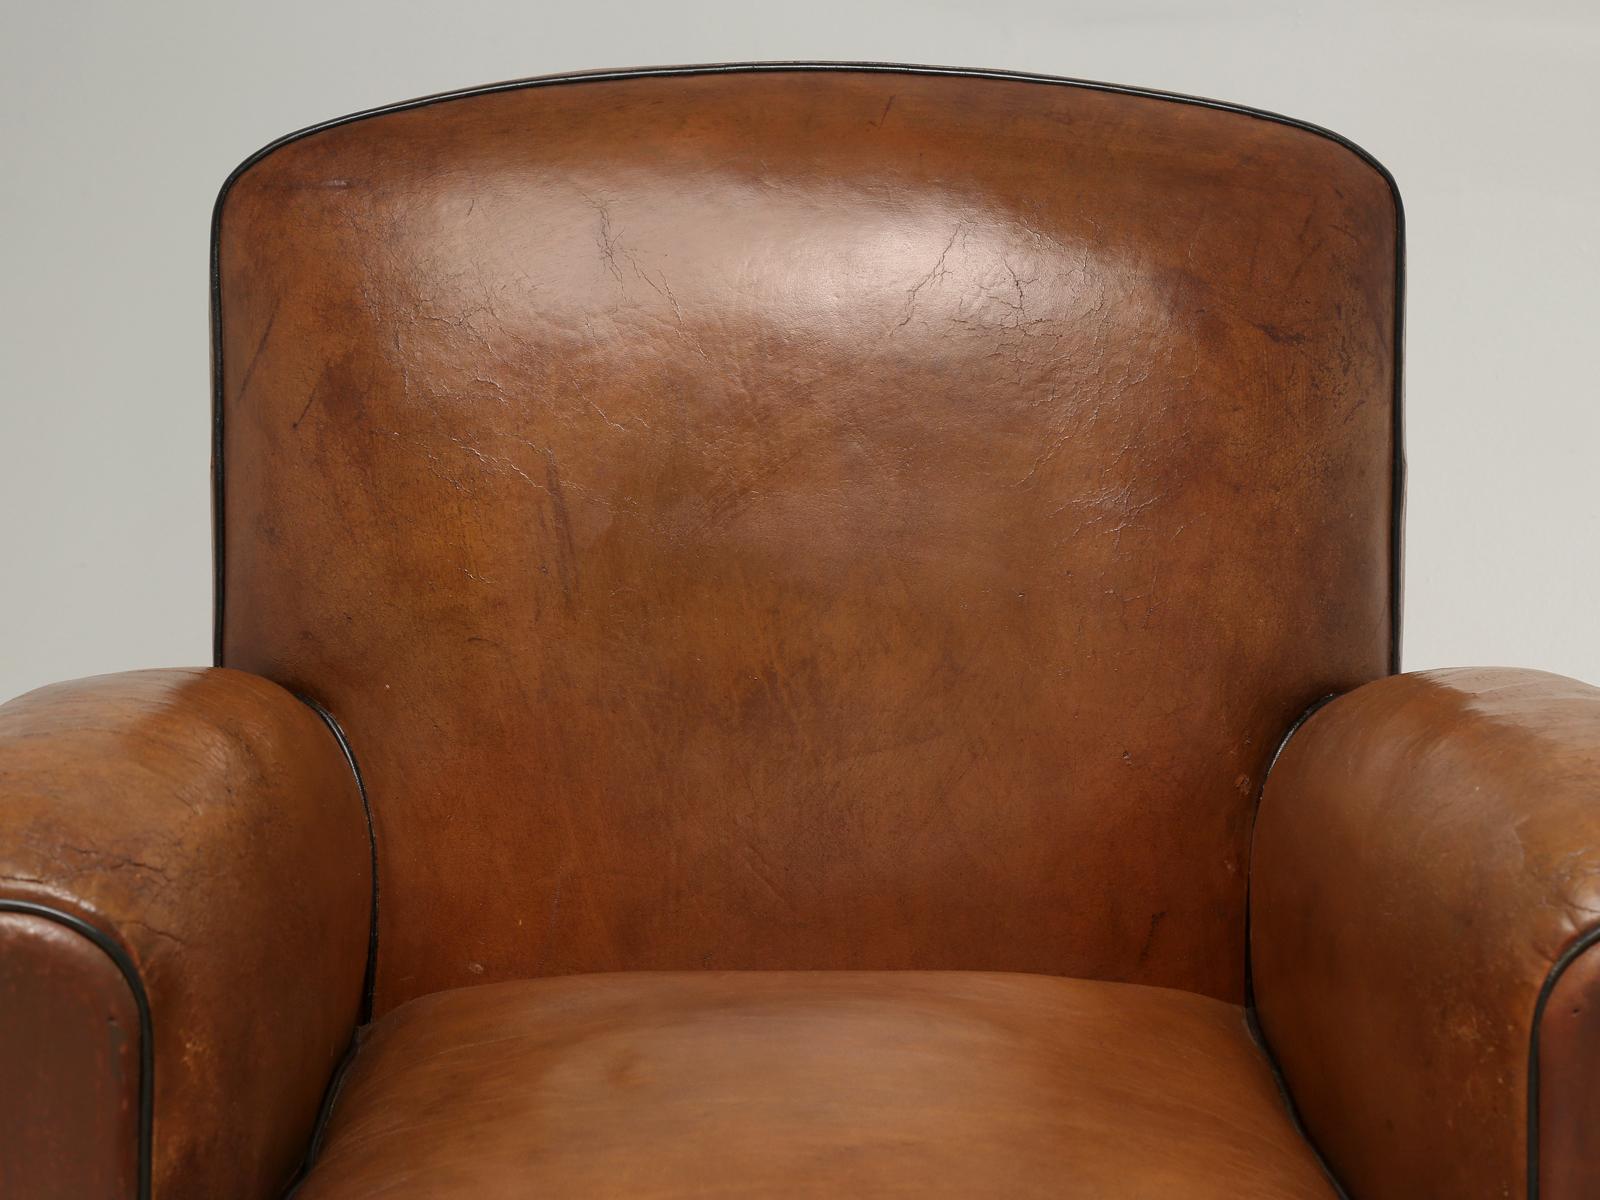 Another pair of French leather club chairs which have just emerged from our inhouse old plank upholstery department. In order to properly conserve or restore one-single club chair, you are looking at roughly 52-man hours of labor. Old Plank has made